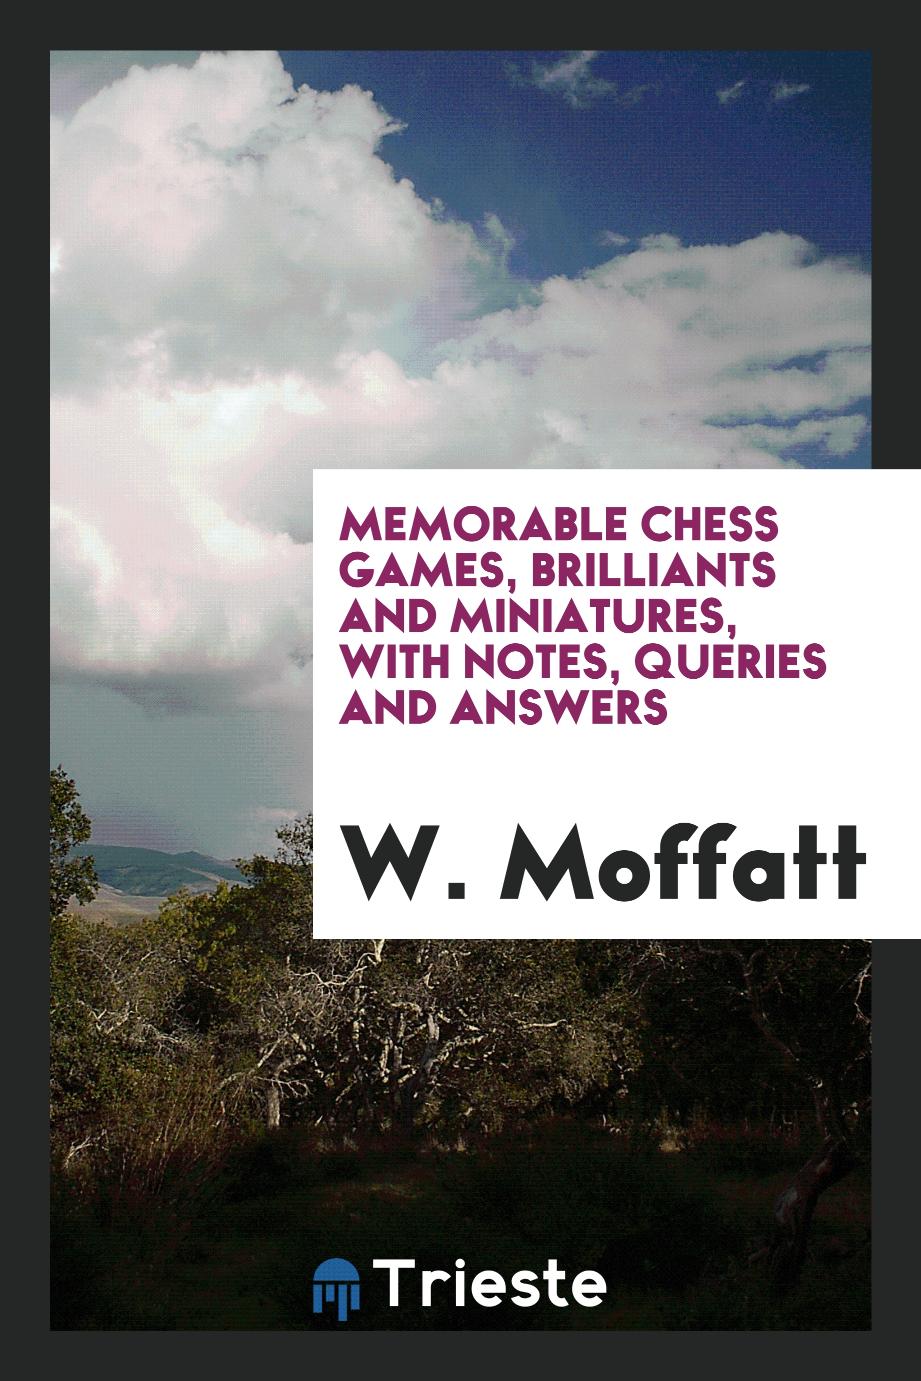 Memorable chess games, brilliants and miniatures, with notes, queries and answers